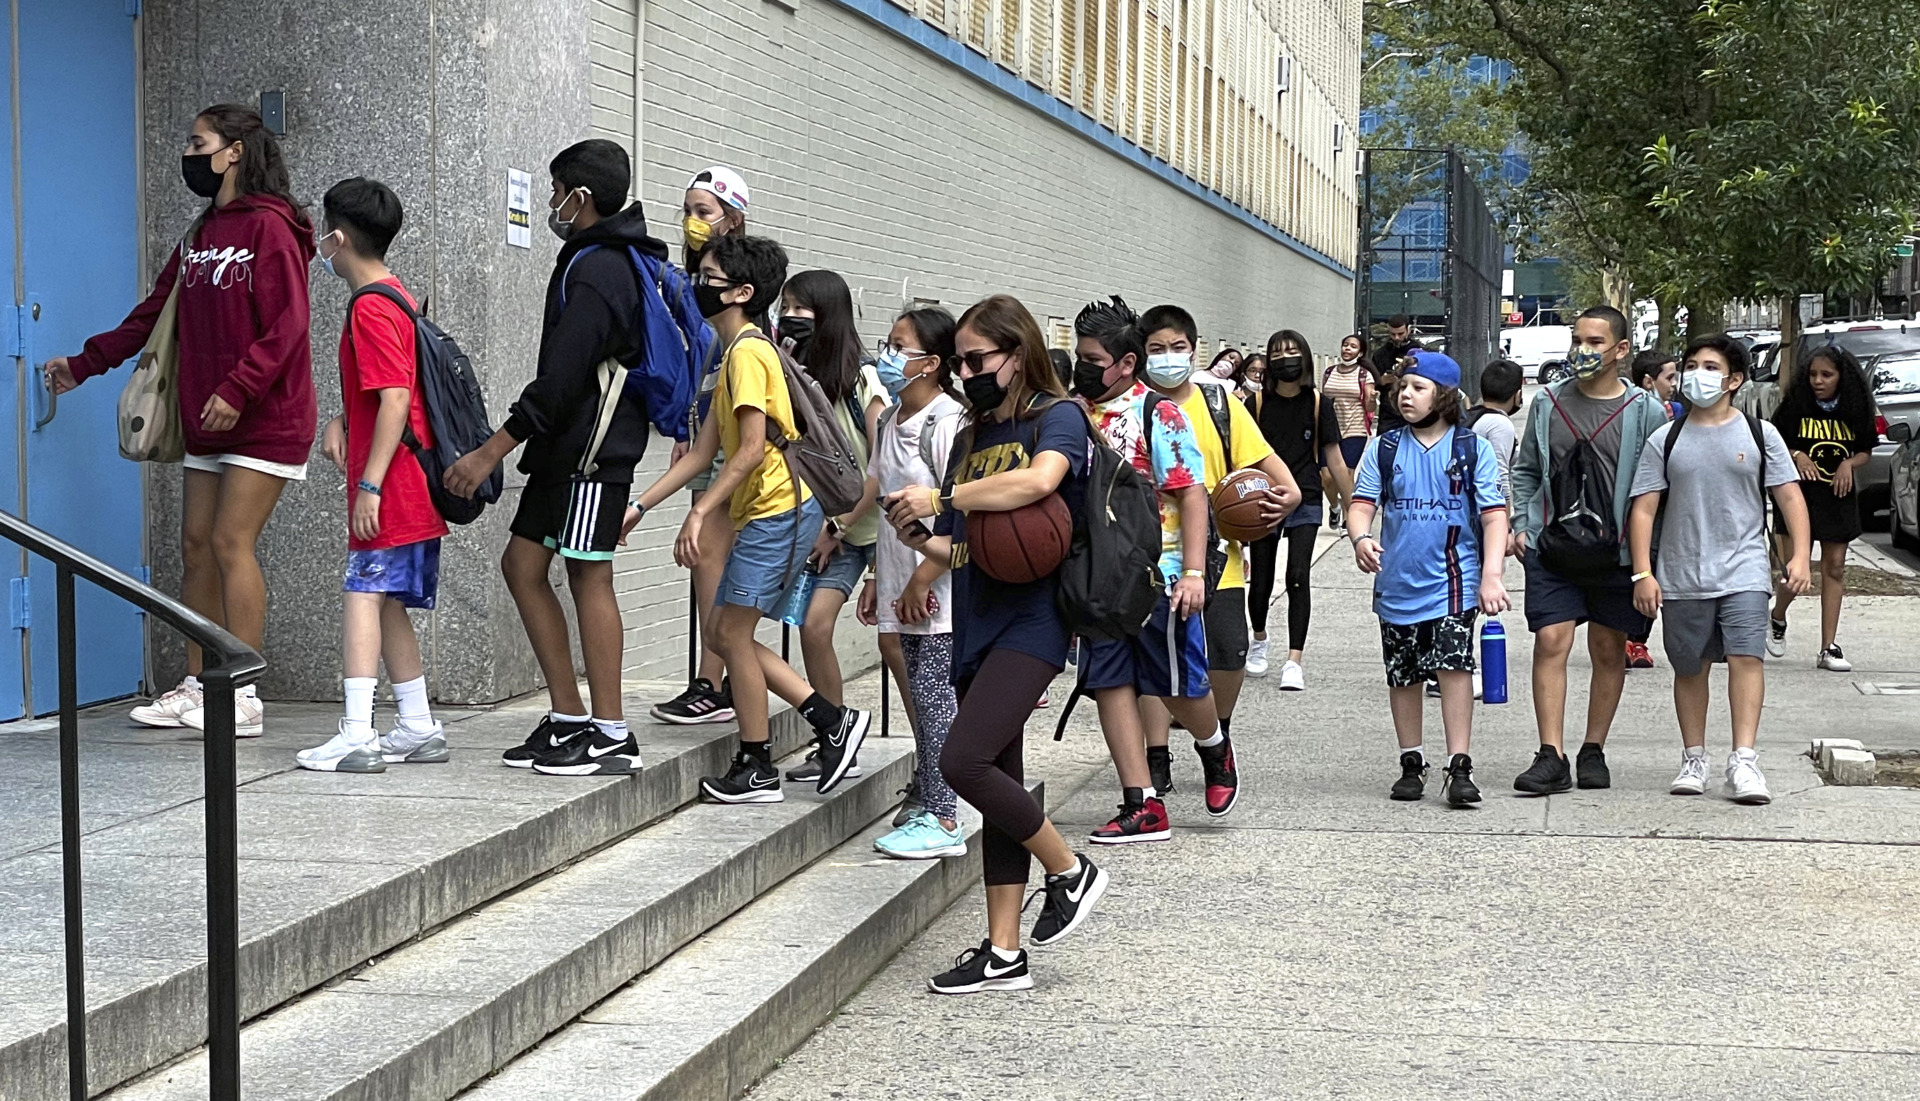 Photo by: STRF/STAR MAX/IPx 2021 8/5/21 As Delta variant spreads, children get ready to return to school. STAR MAX Photo: 8/5/21 Students at the Simon Baruch School in Manhattan.